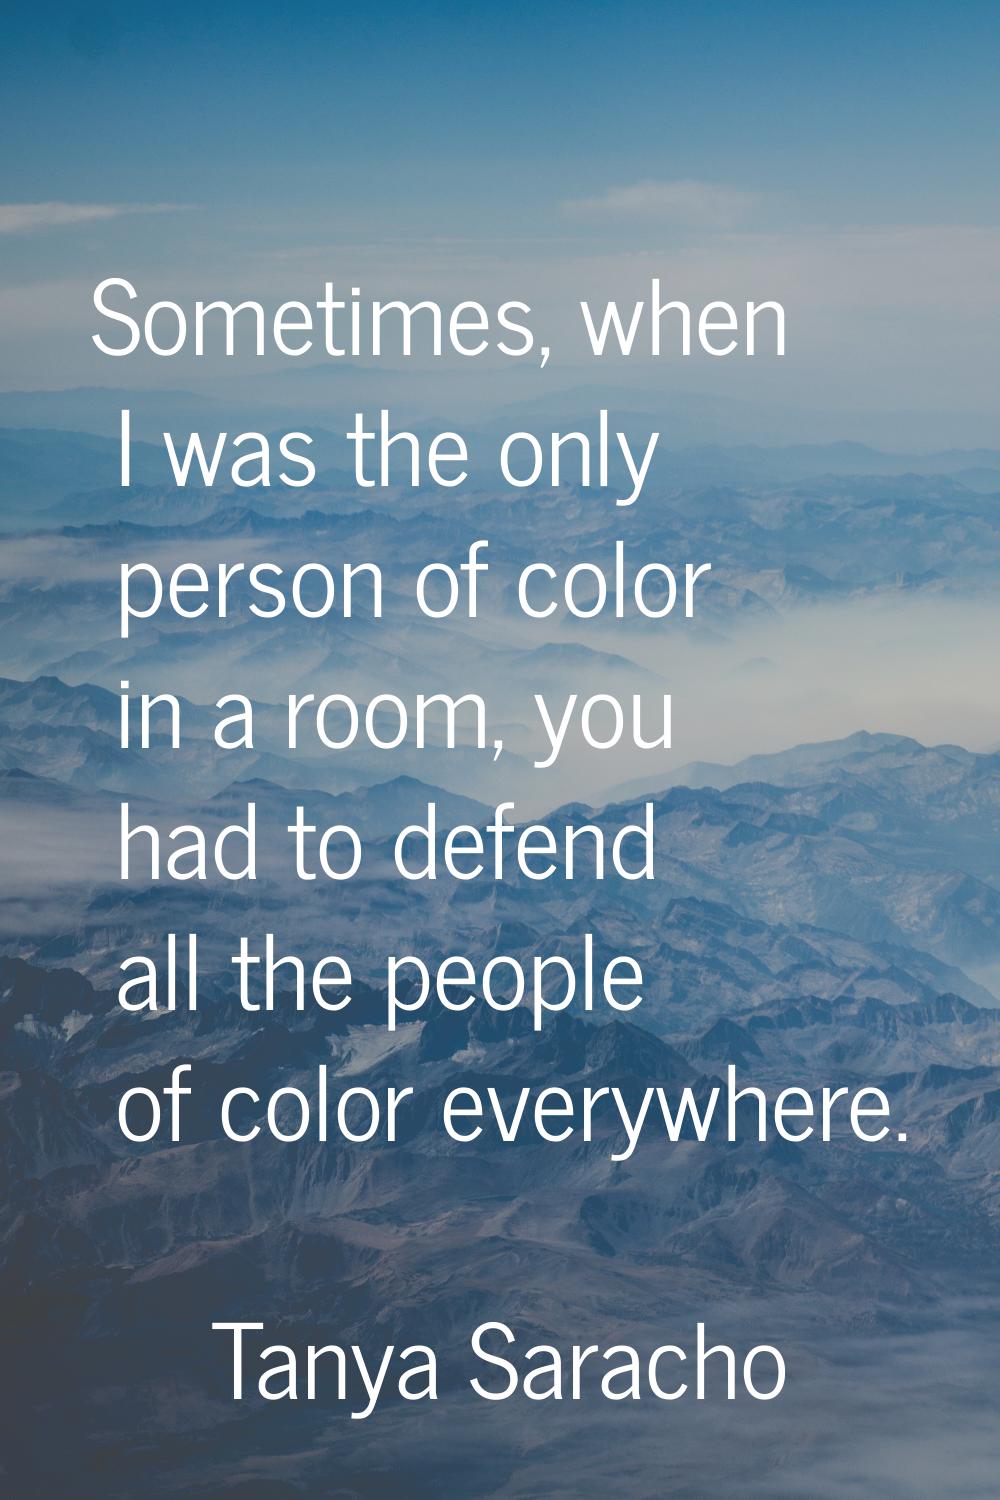 Sometimes, when I was the only person of color in a room, you had to defend all the people of color